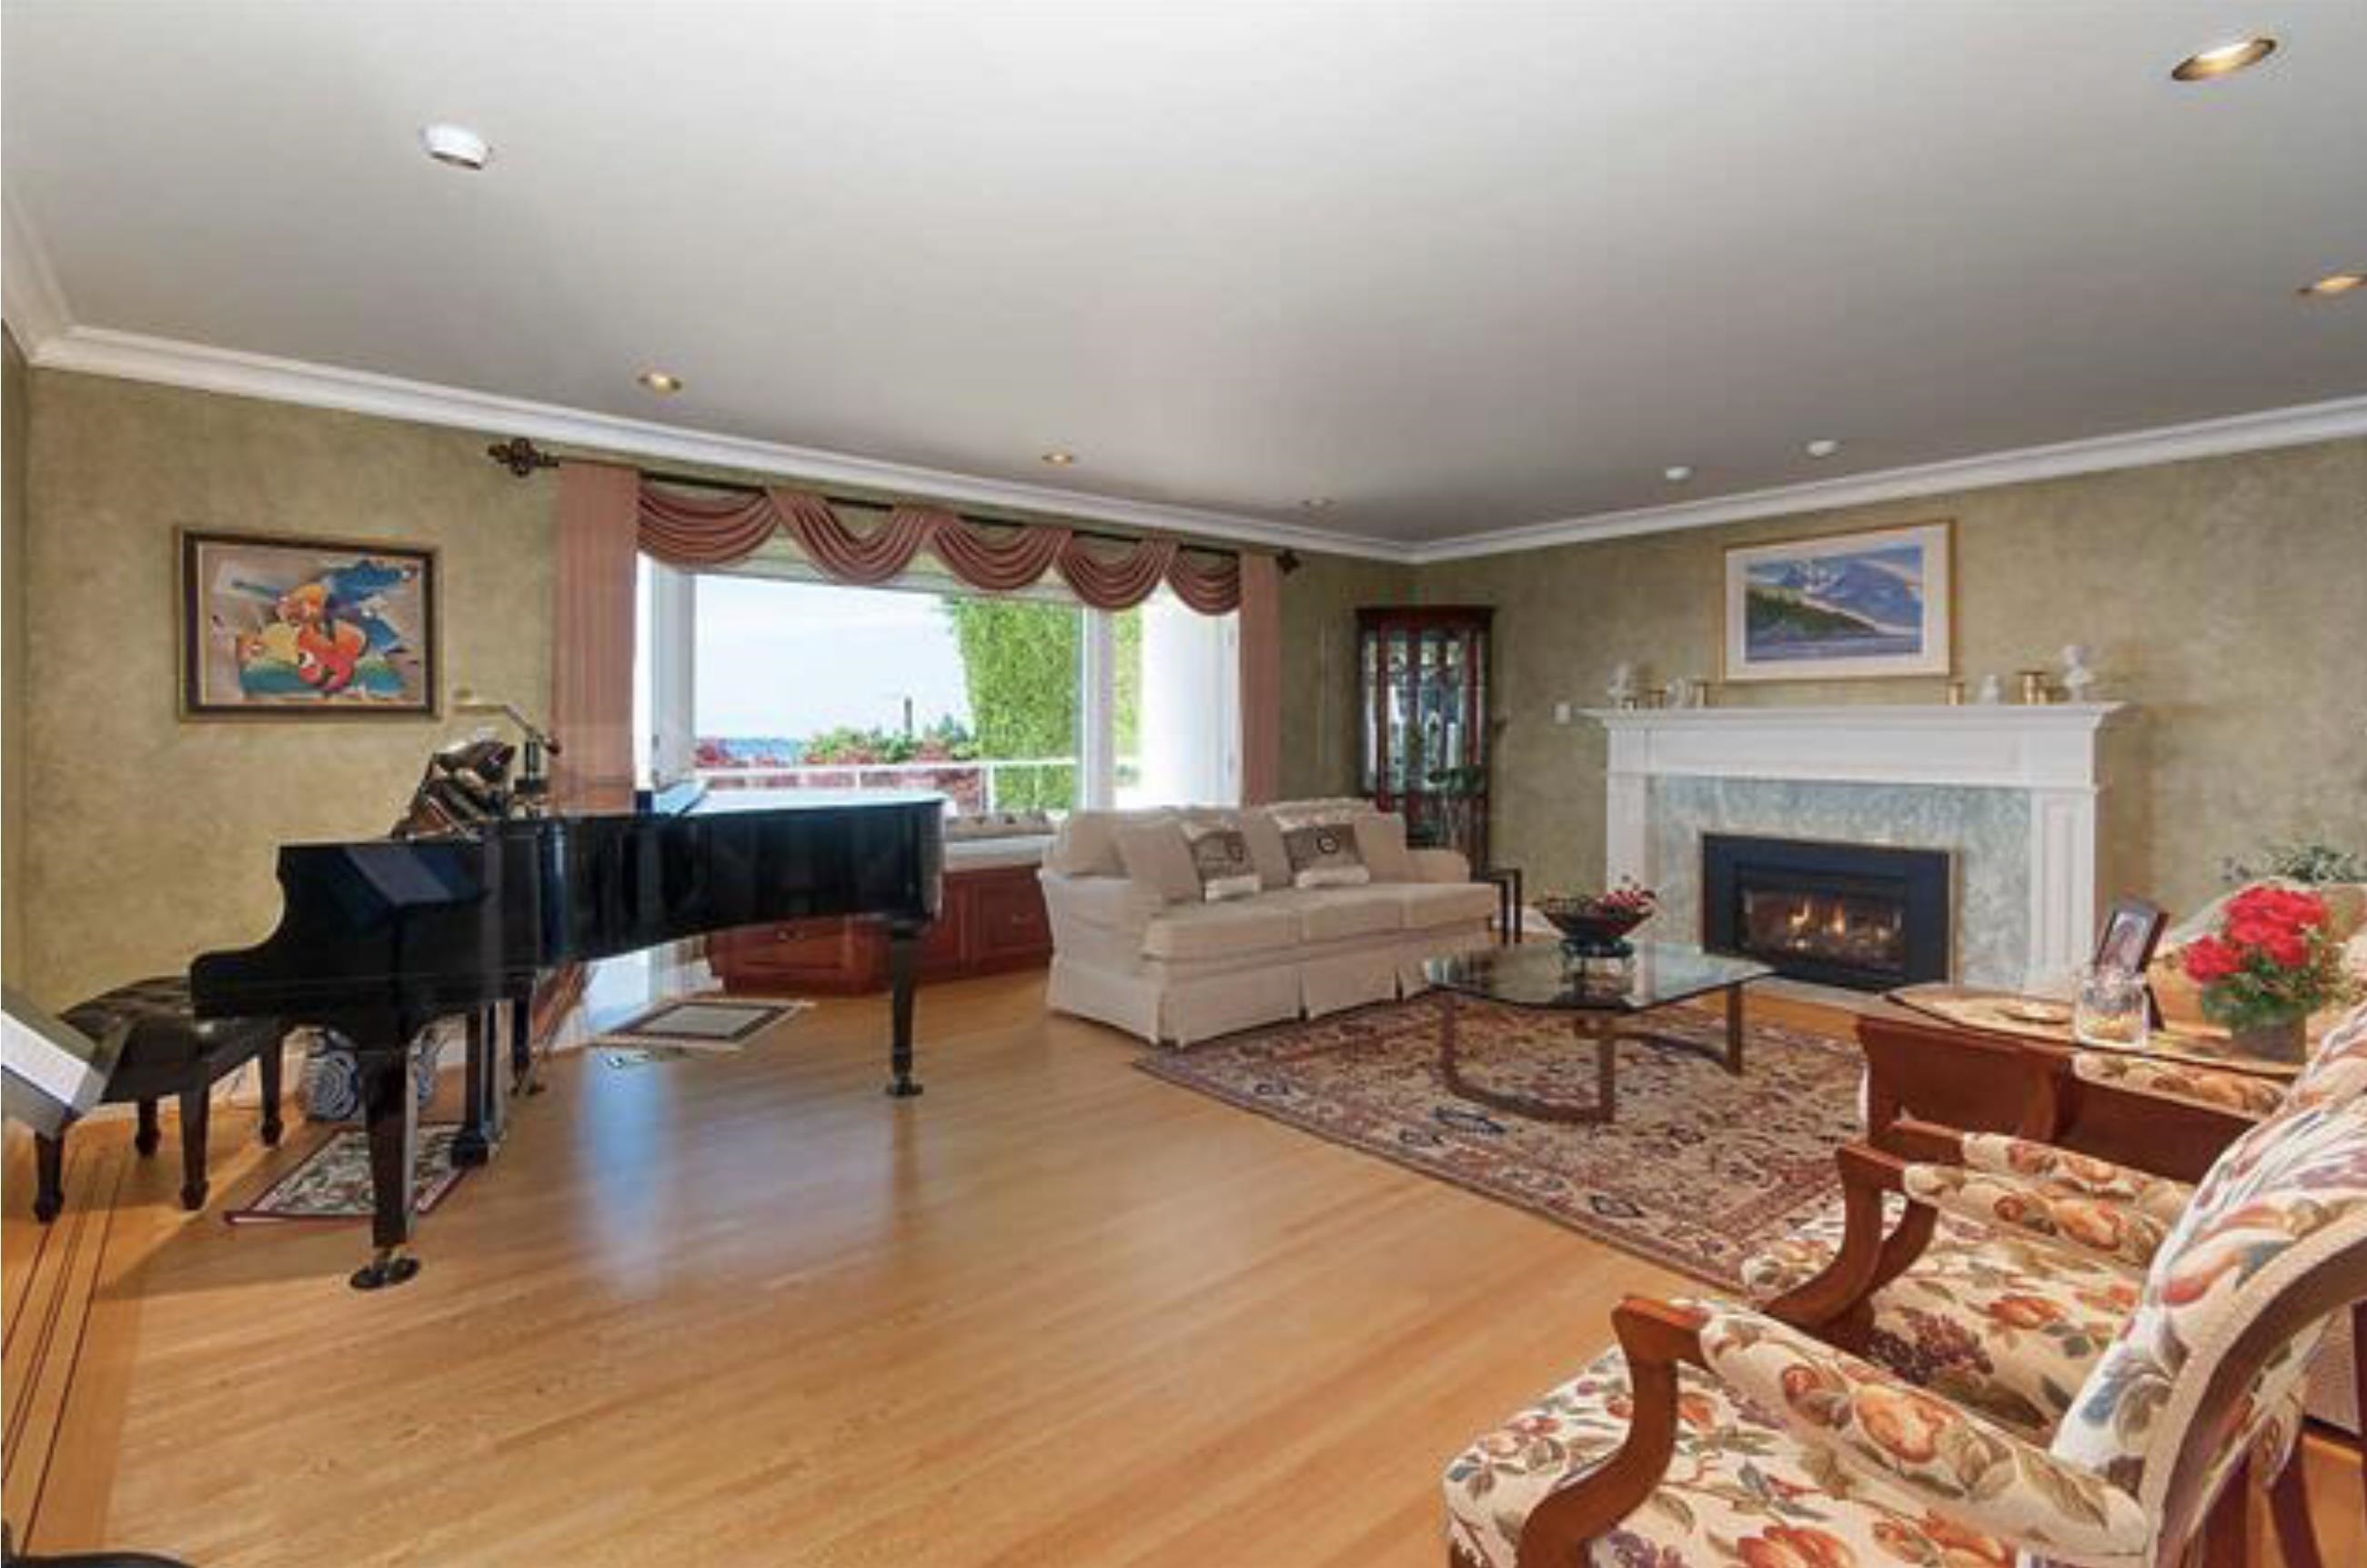 Listing image of 940 KING GEORGES WAY